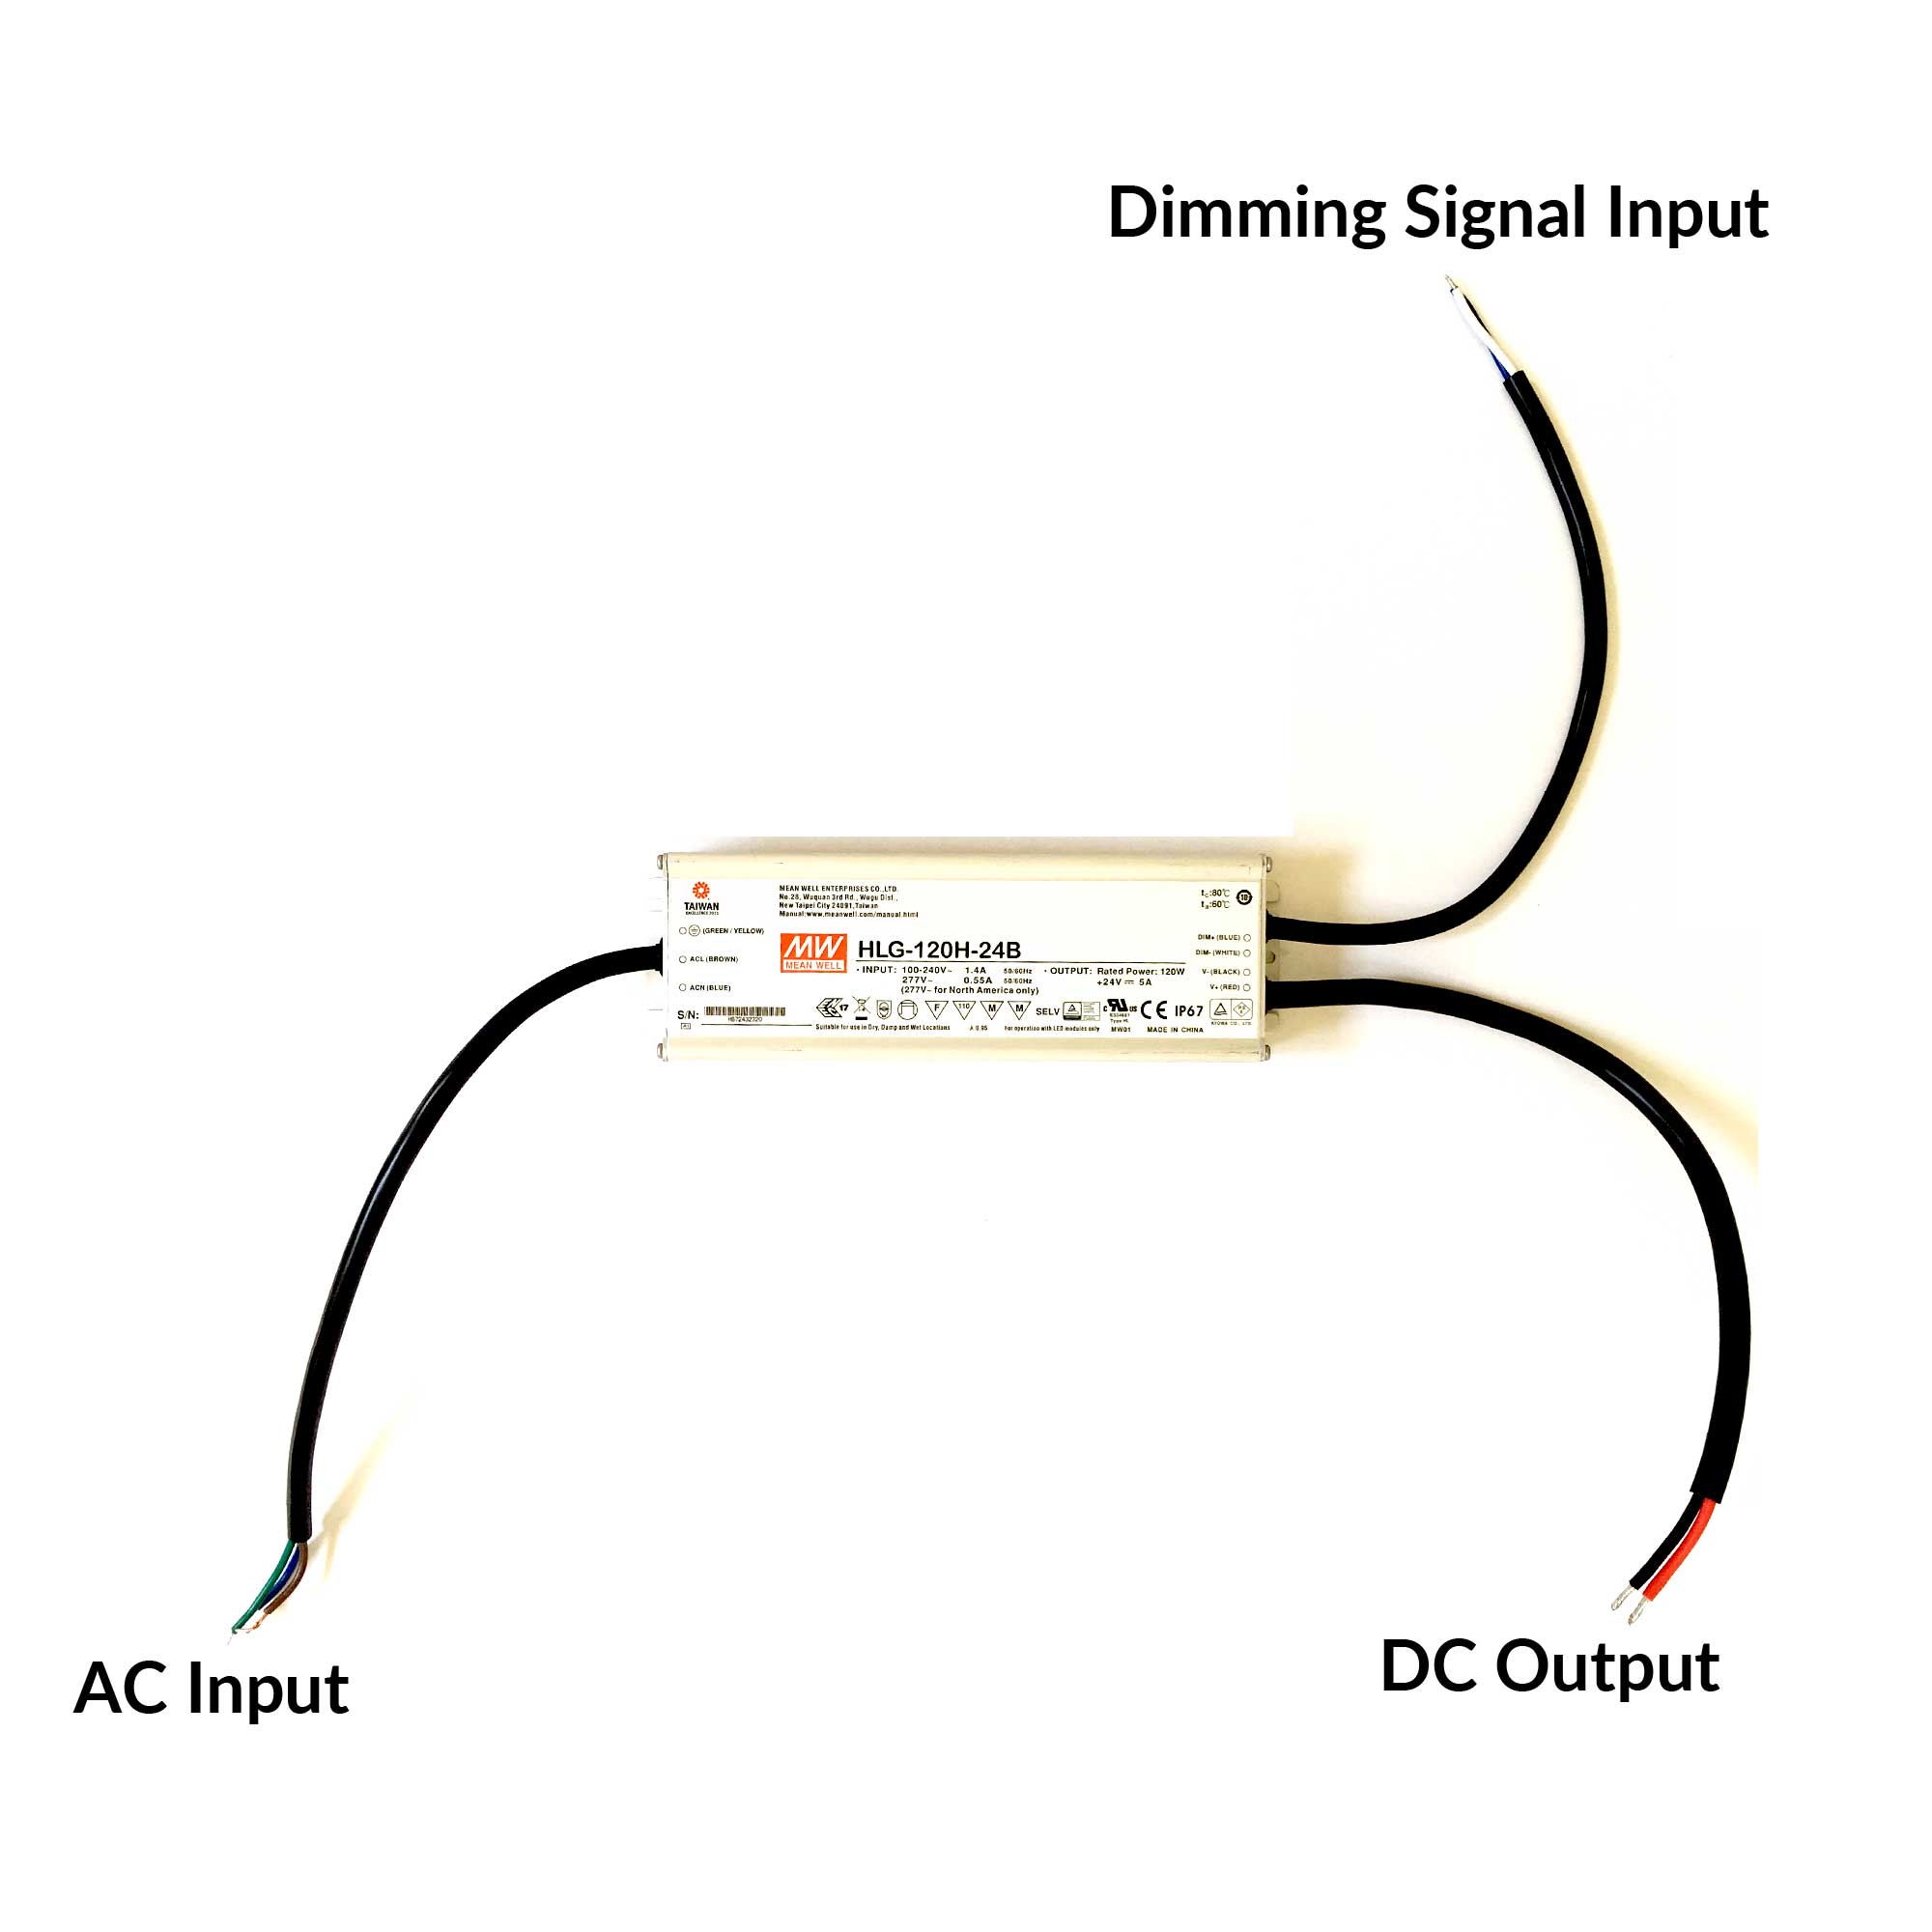 How To Connect An Led Strip To A Power Supply Waveform Lighting